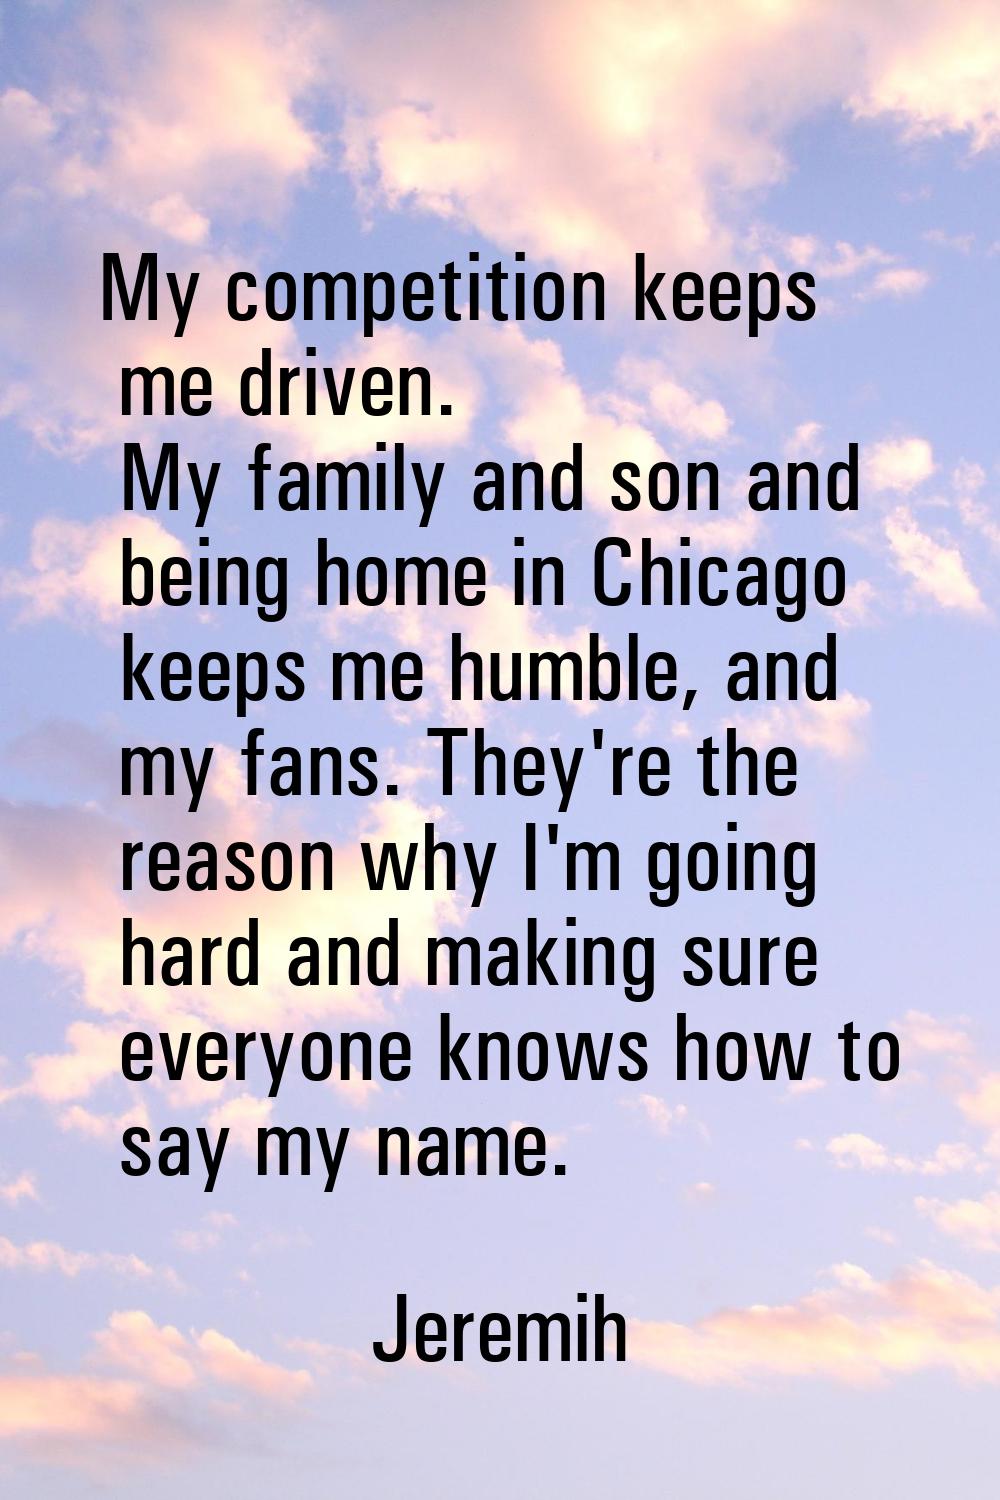 My competition keeps me driven. My family and son and being home in Chicago keeps me humble, and my